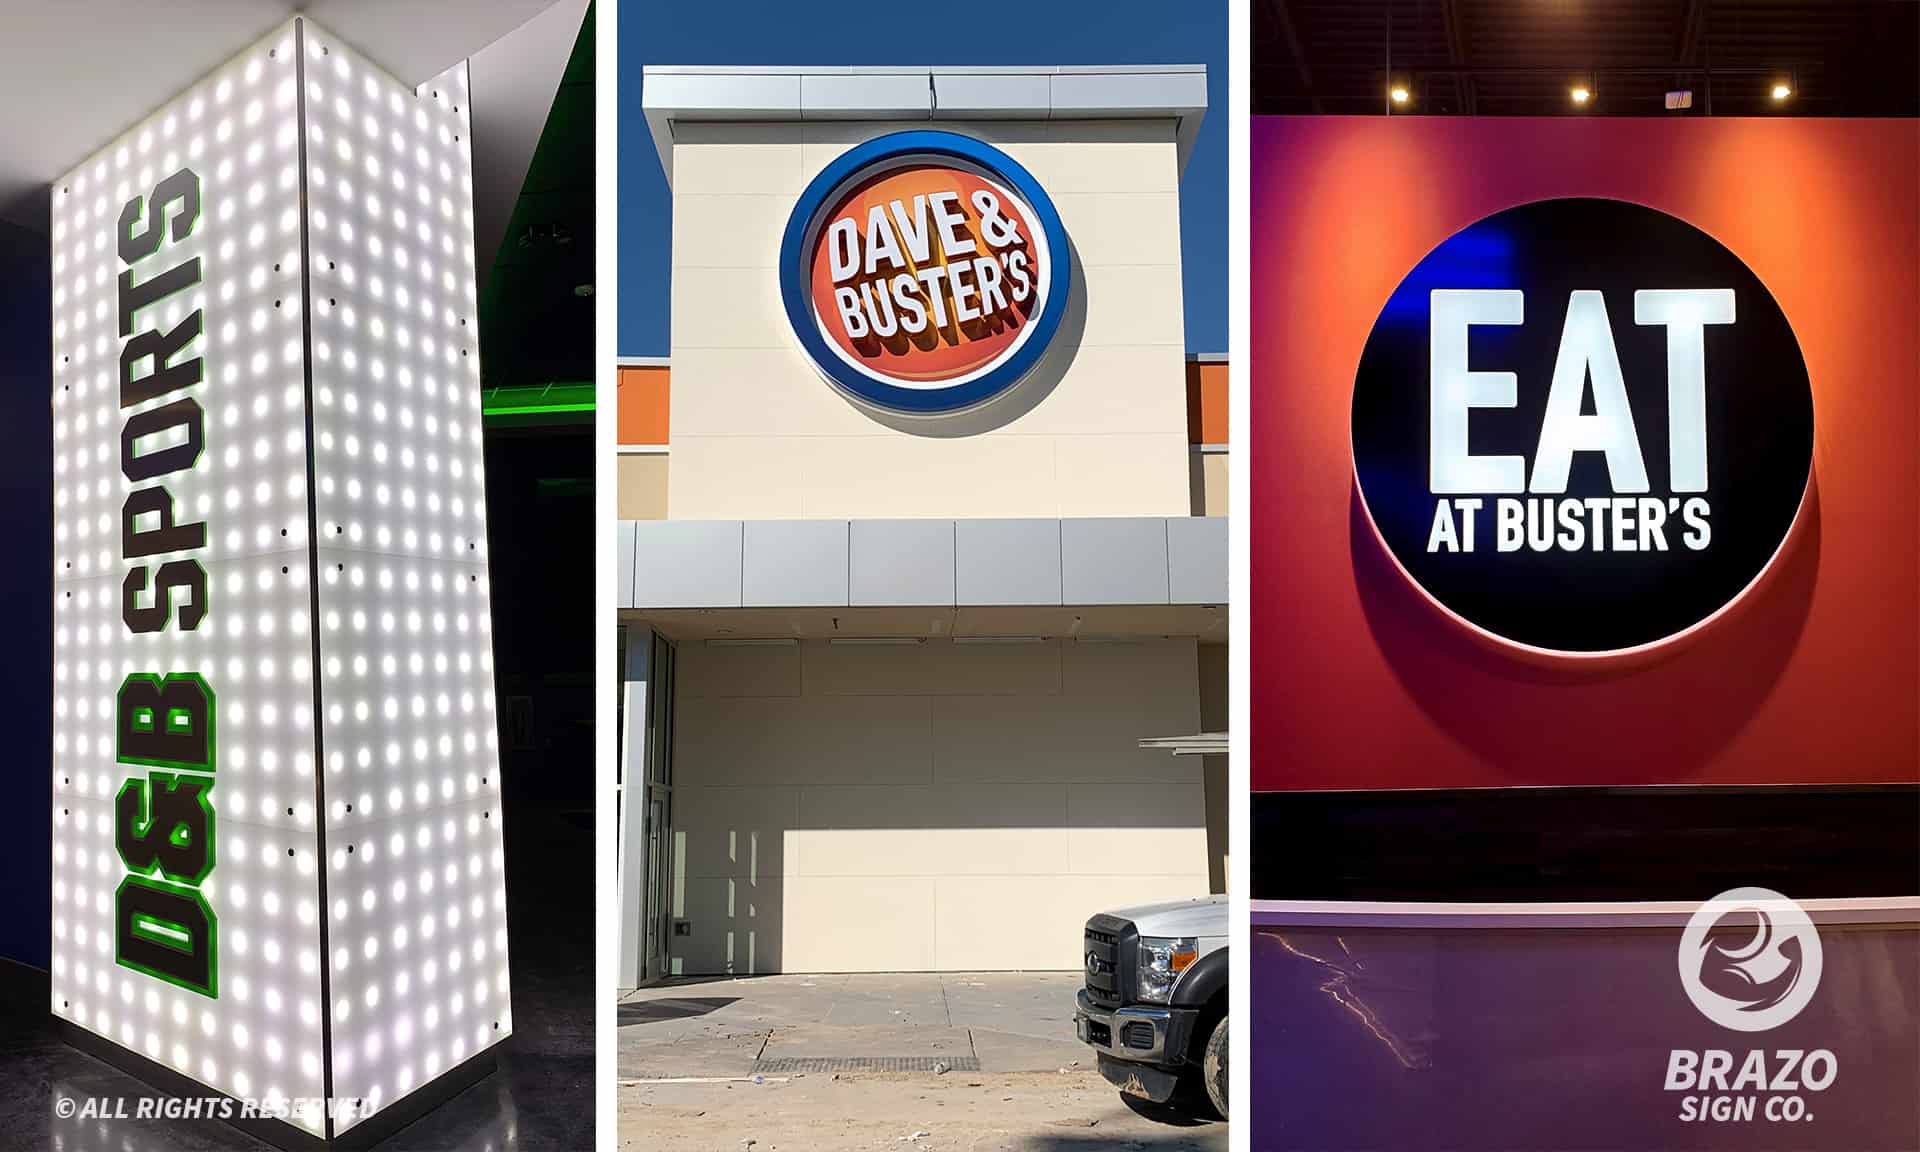 👋 Dave & Buster's, enjoy this welcome offer - Dave & Buster's